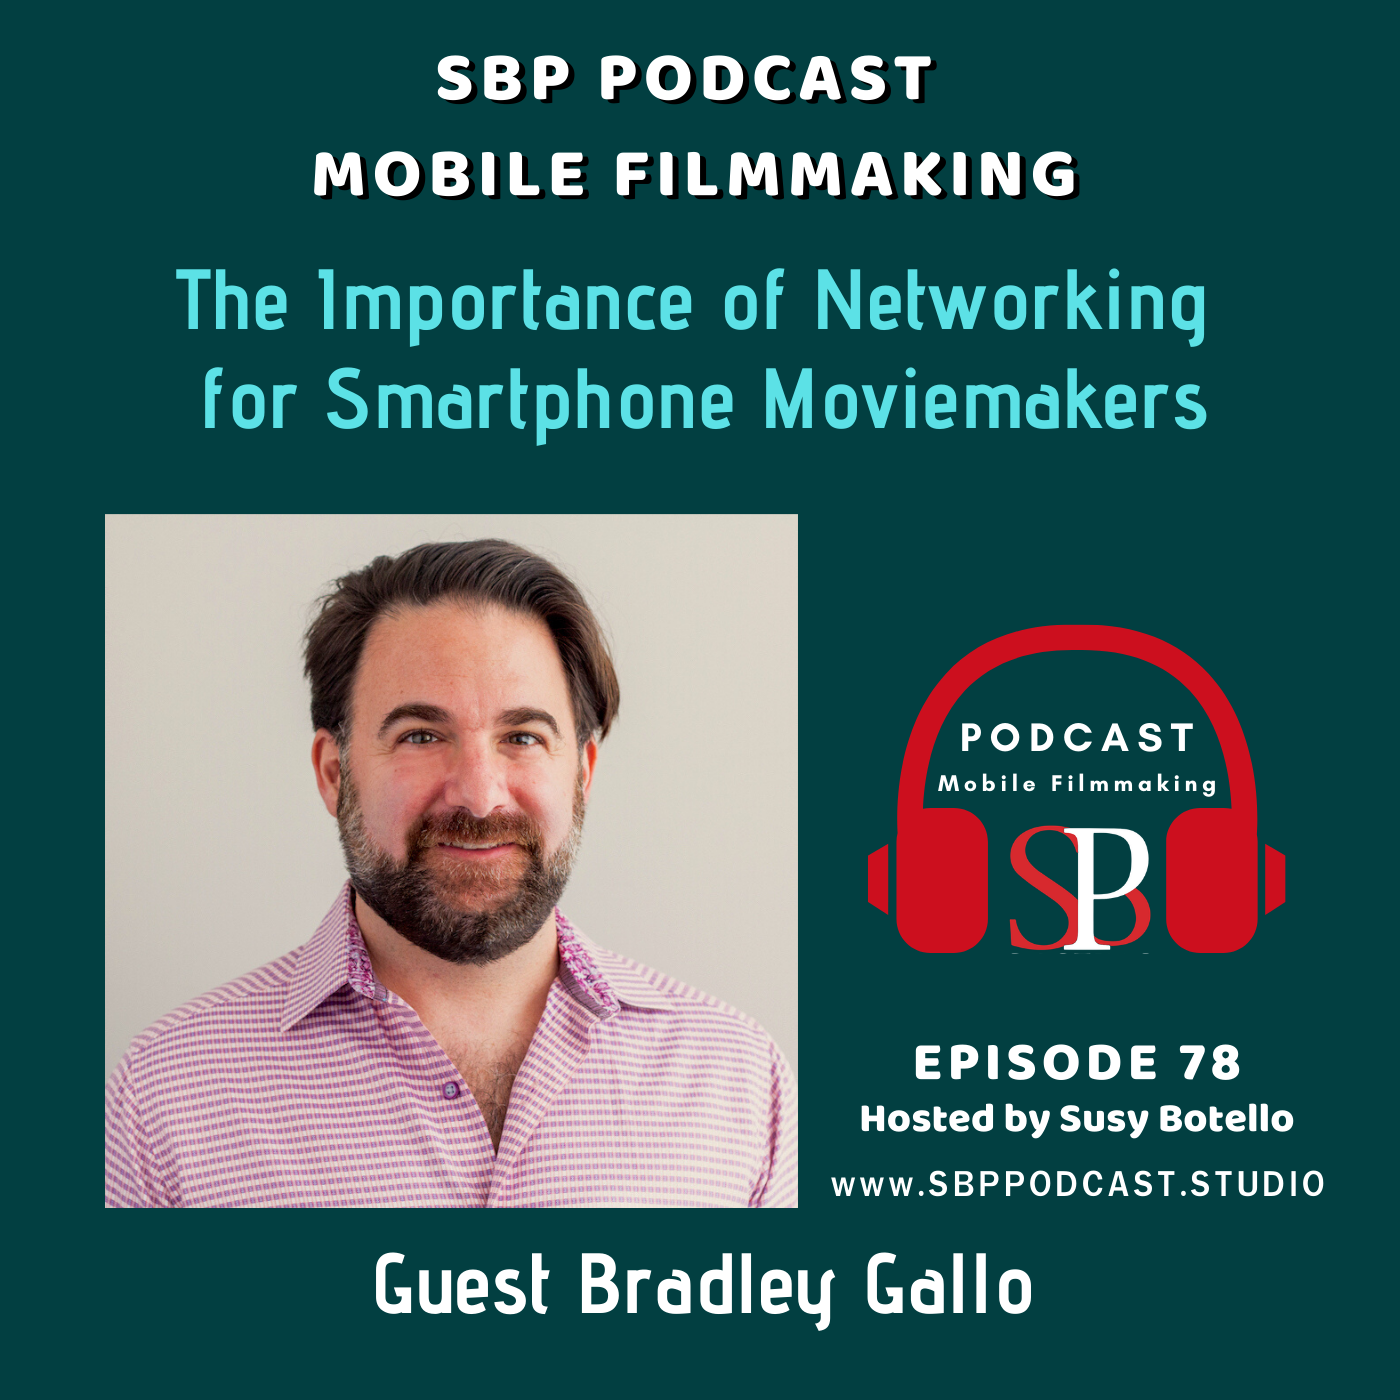 The Importance of Networking for Smartphone Moviemakers with Bradley Gallo Image